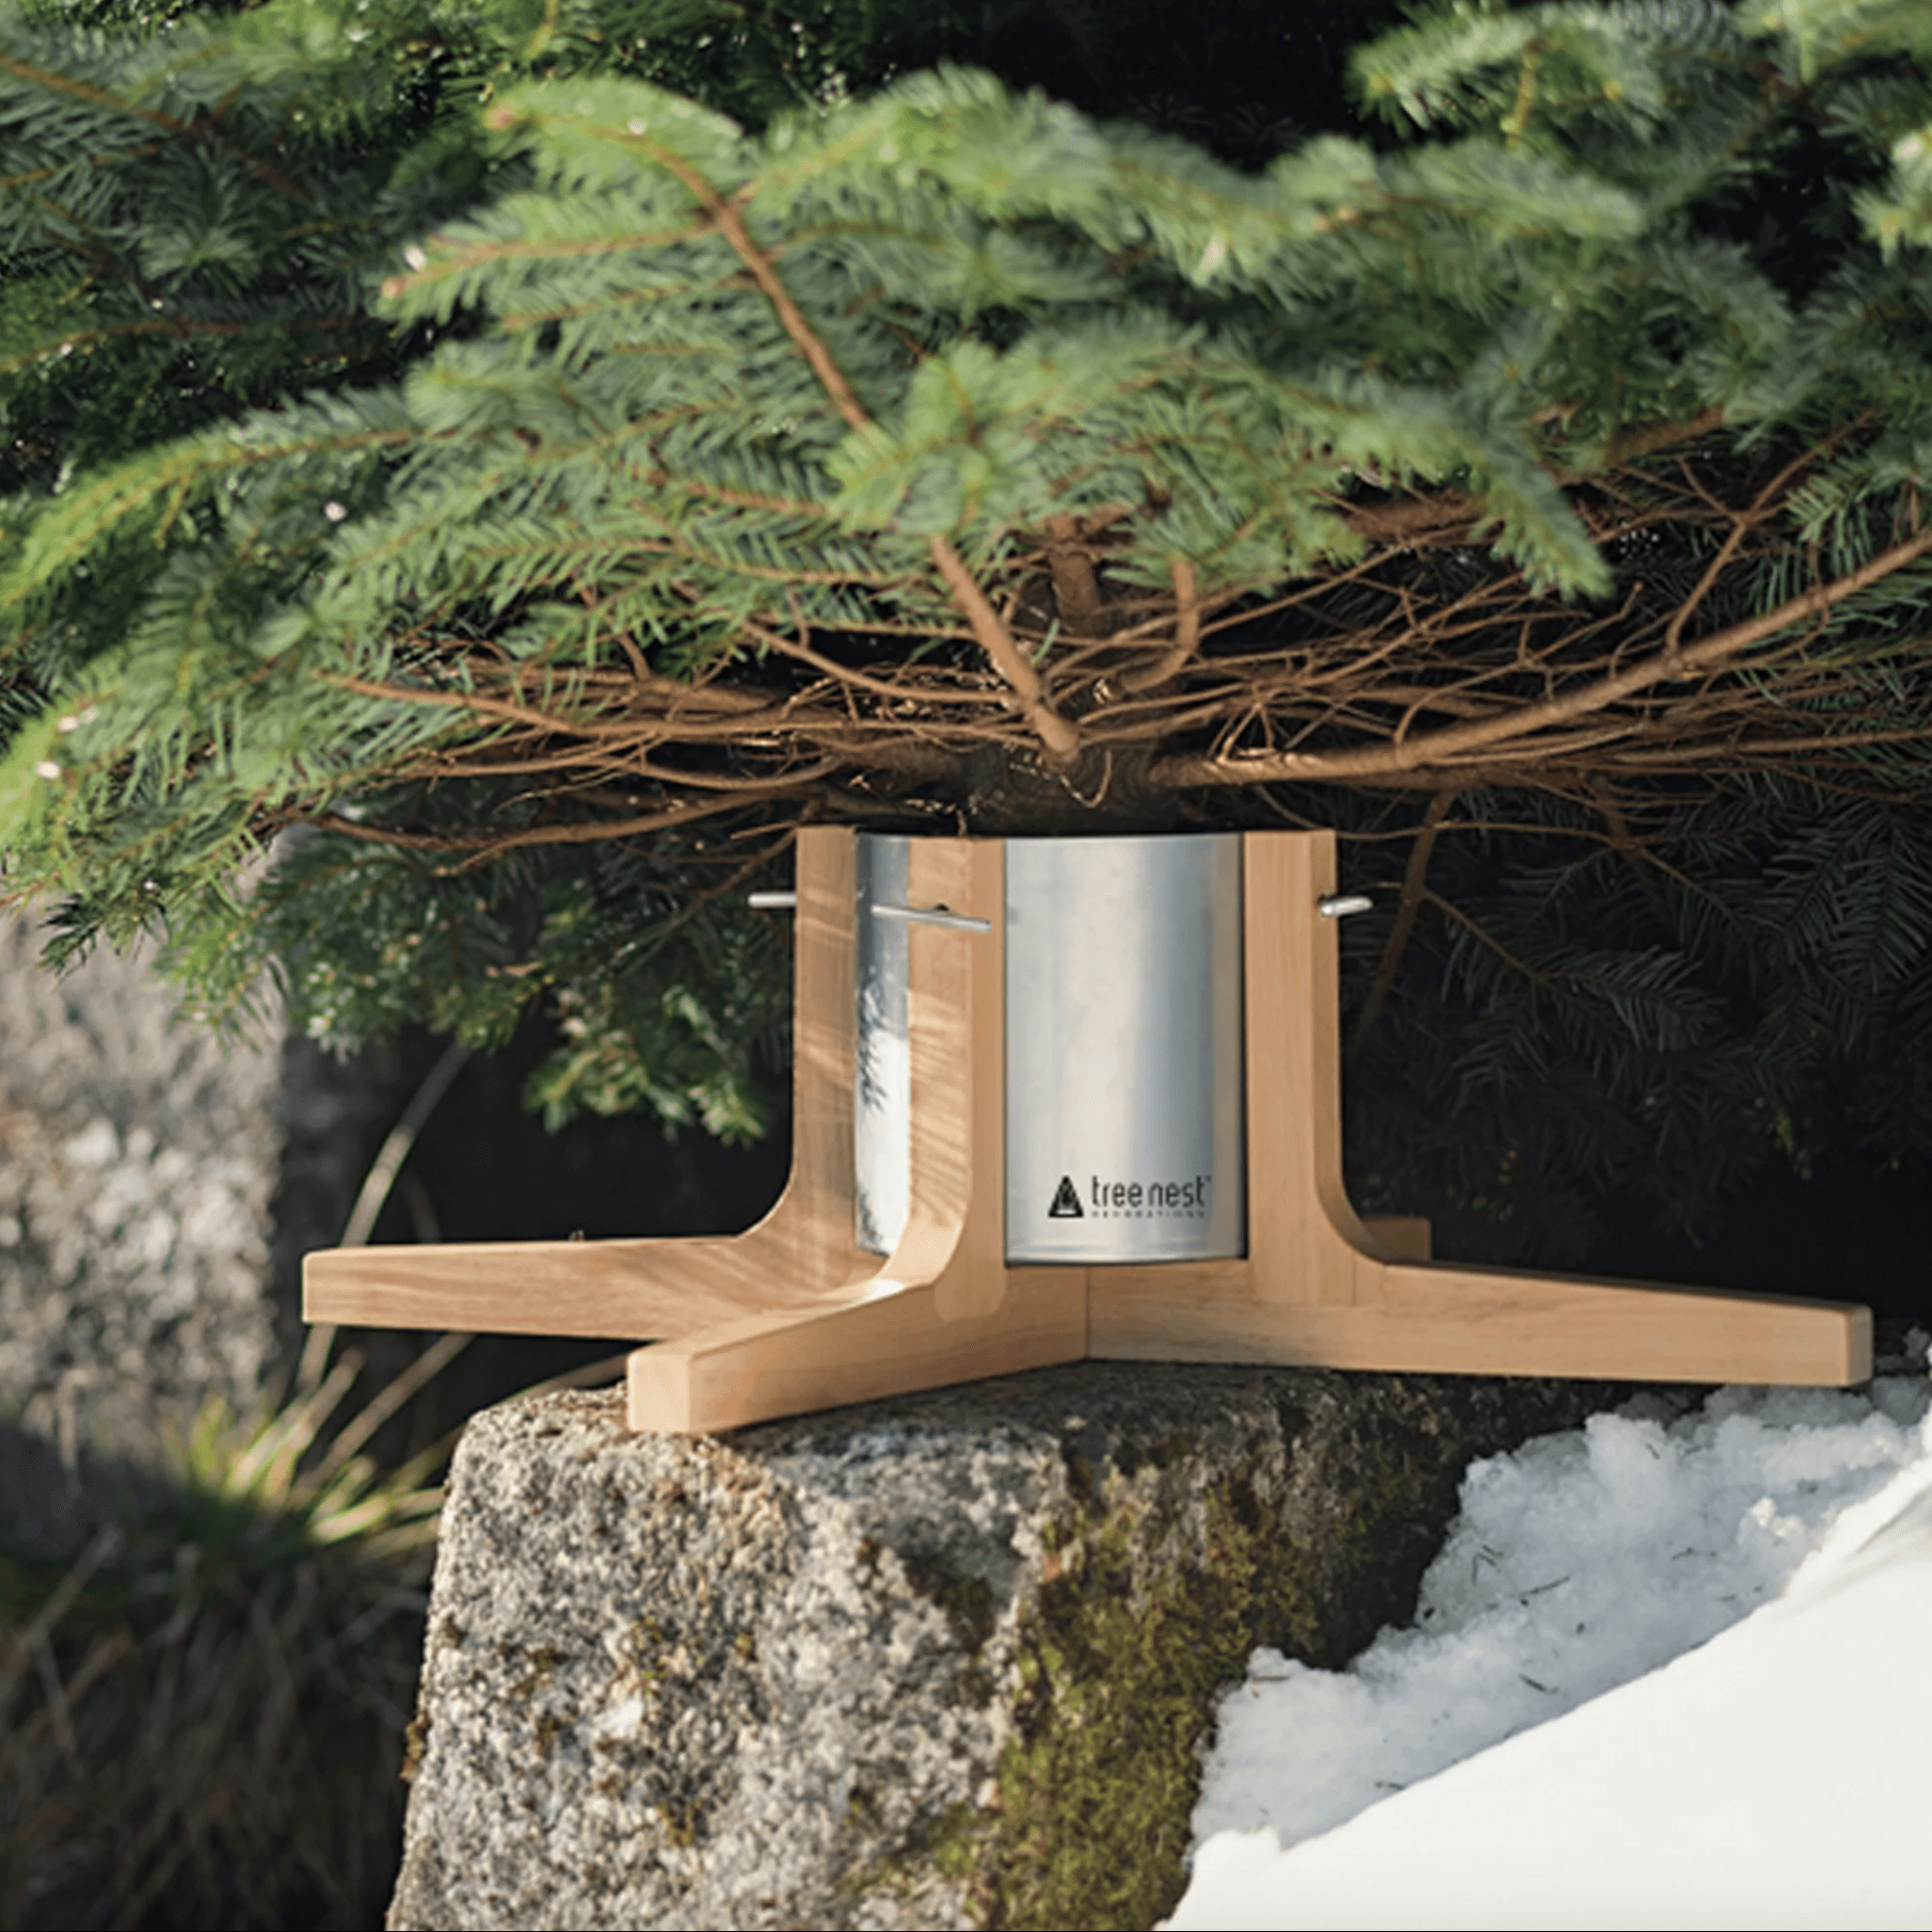 12 Best Christmas Tree Stands 2022 - Top Holiday Tree Stands